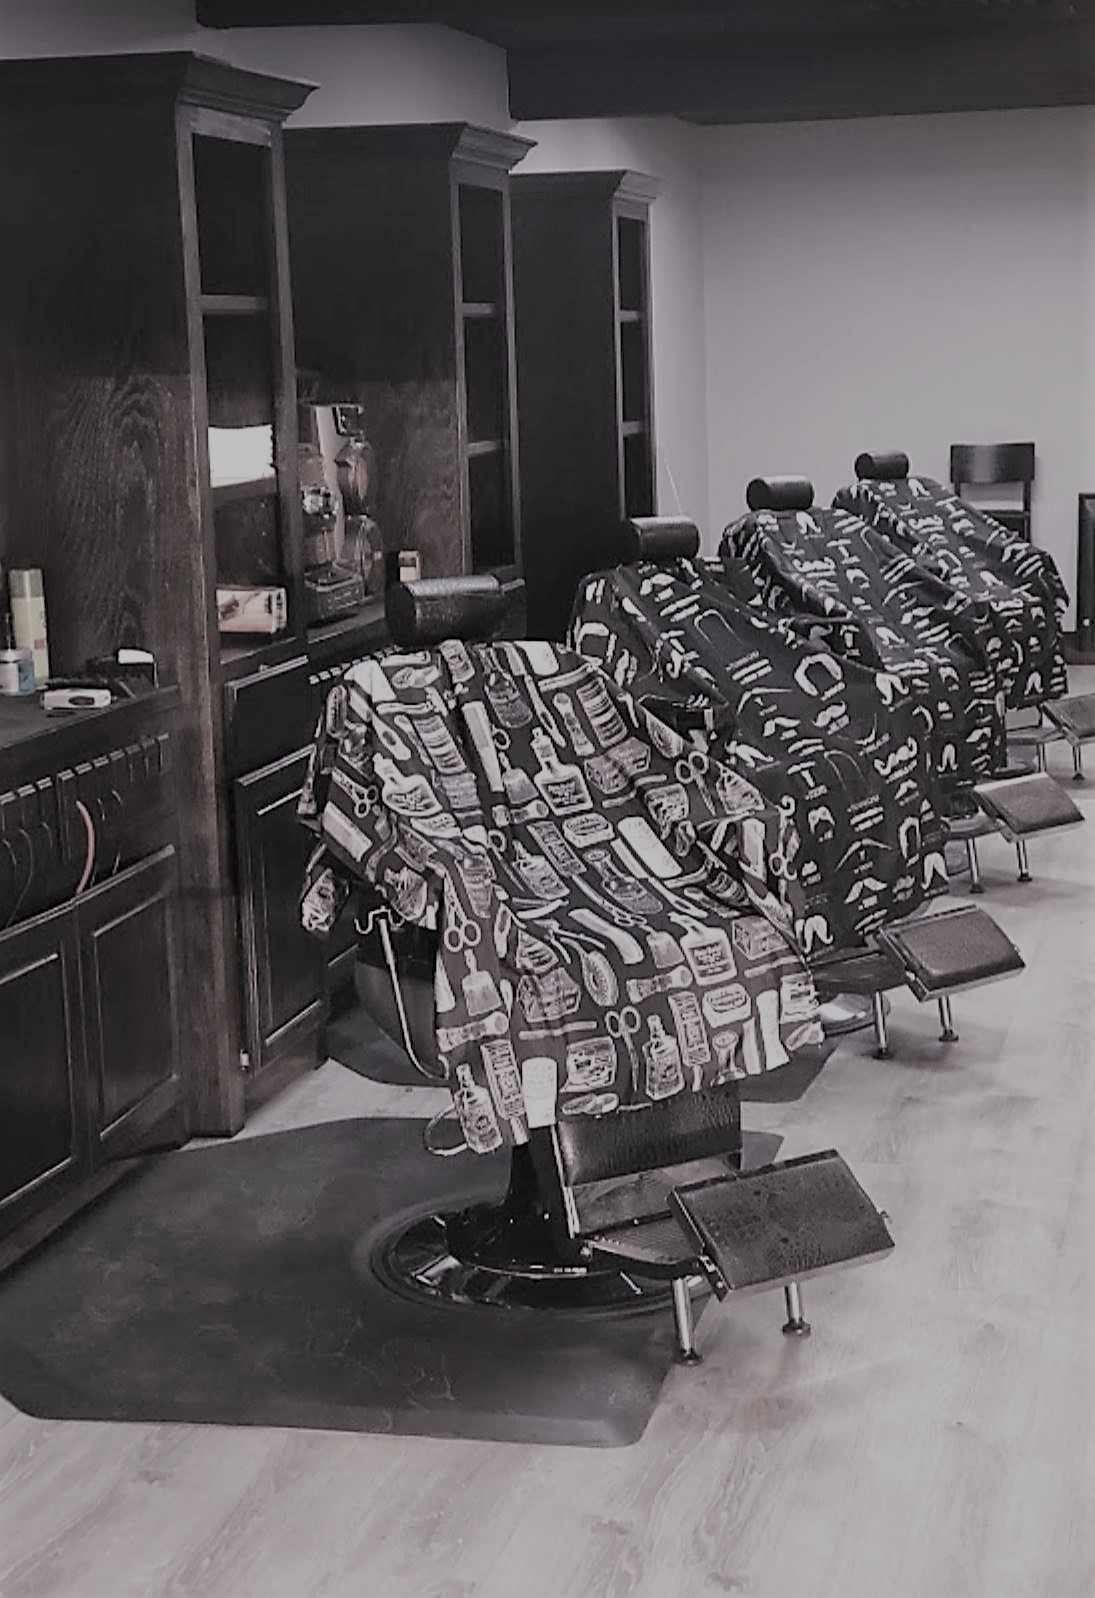 The Barber's Lounge